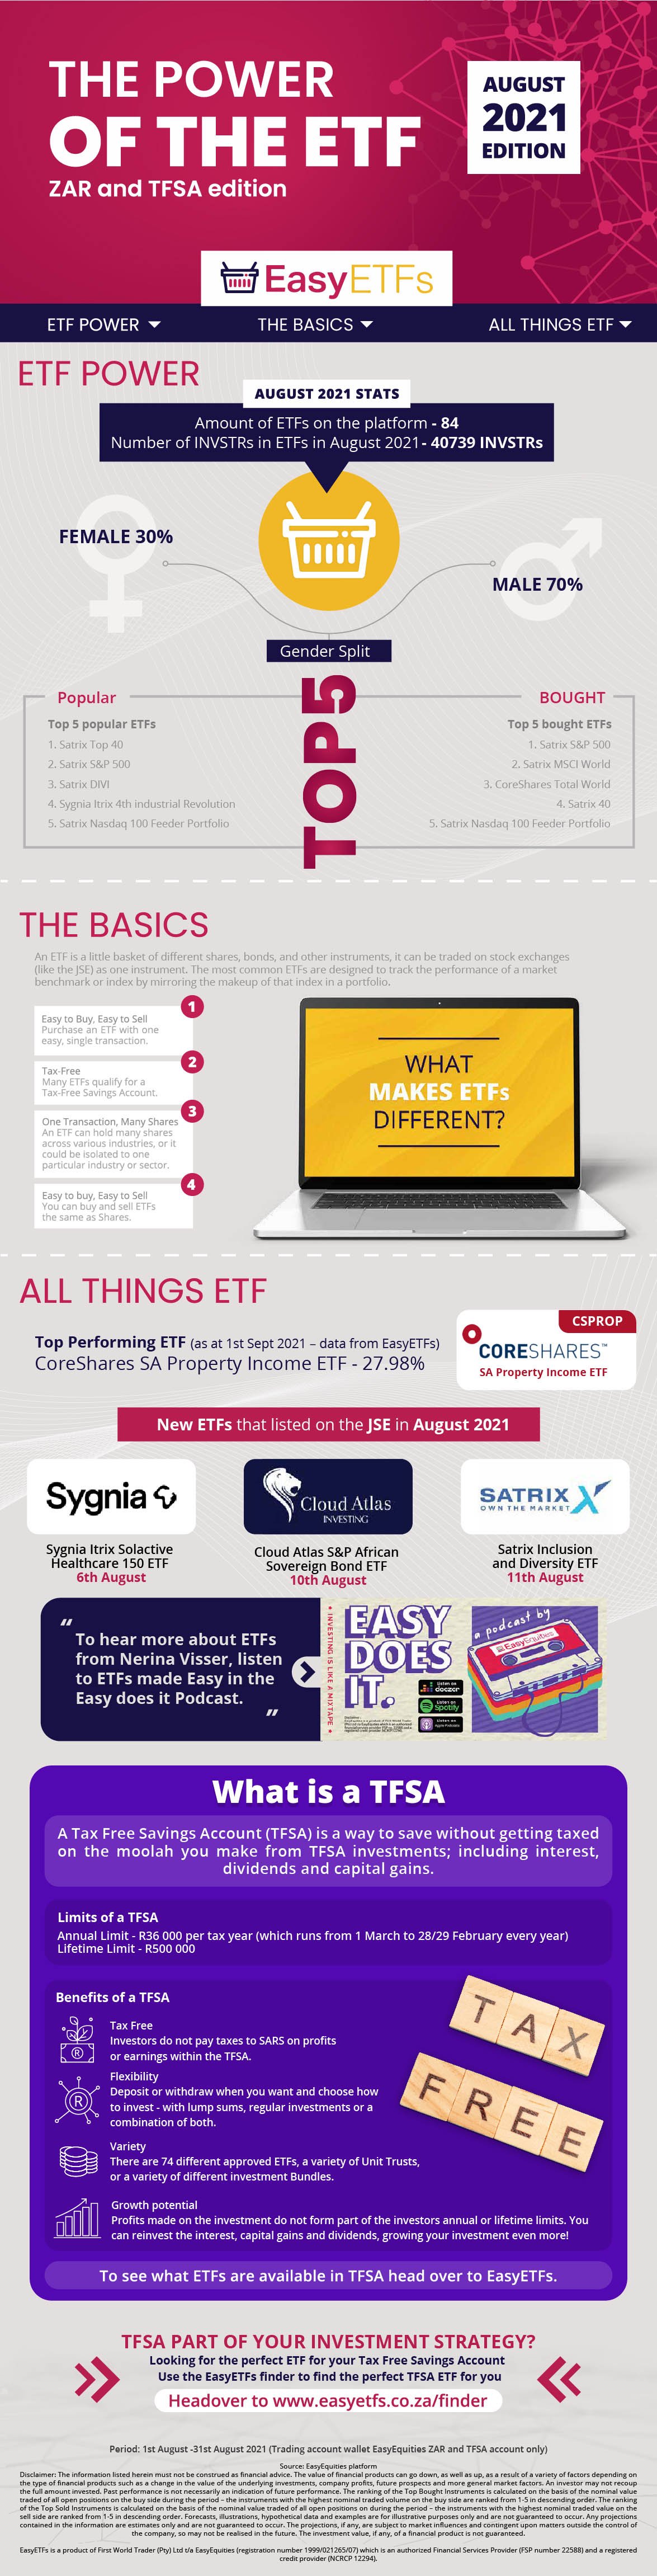 ETF POWER First Edition August Edition-01